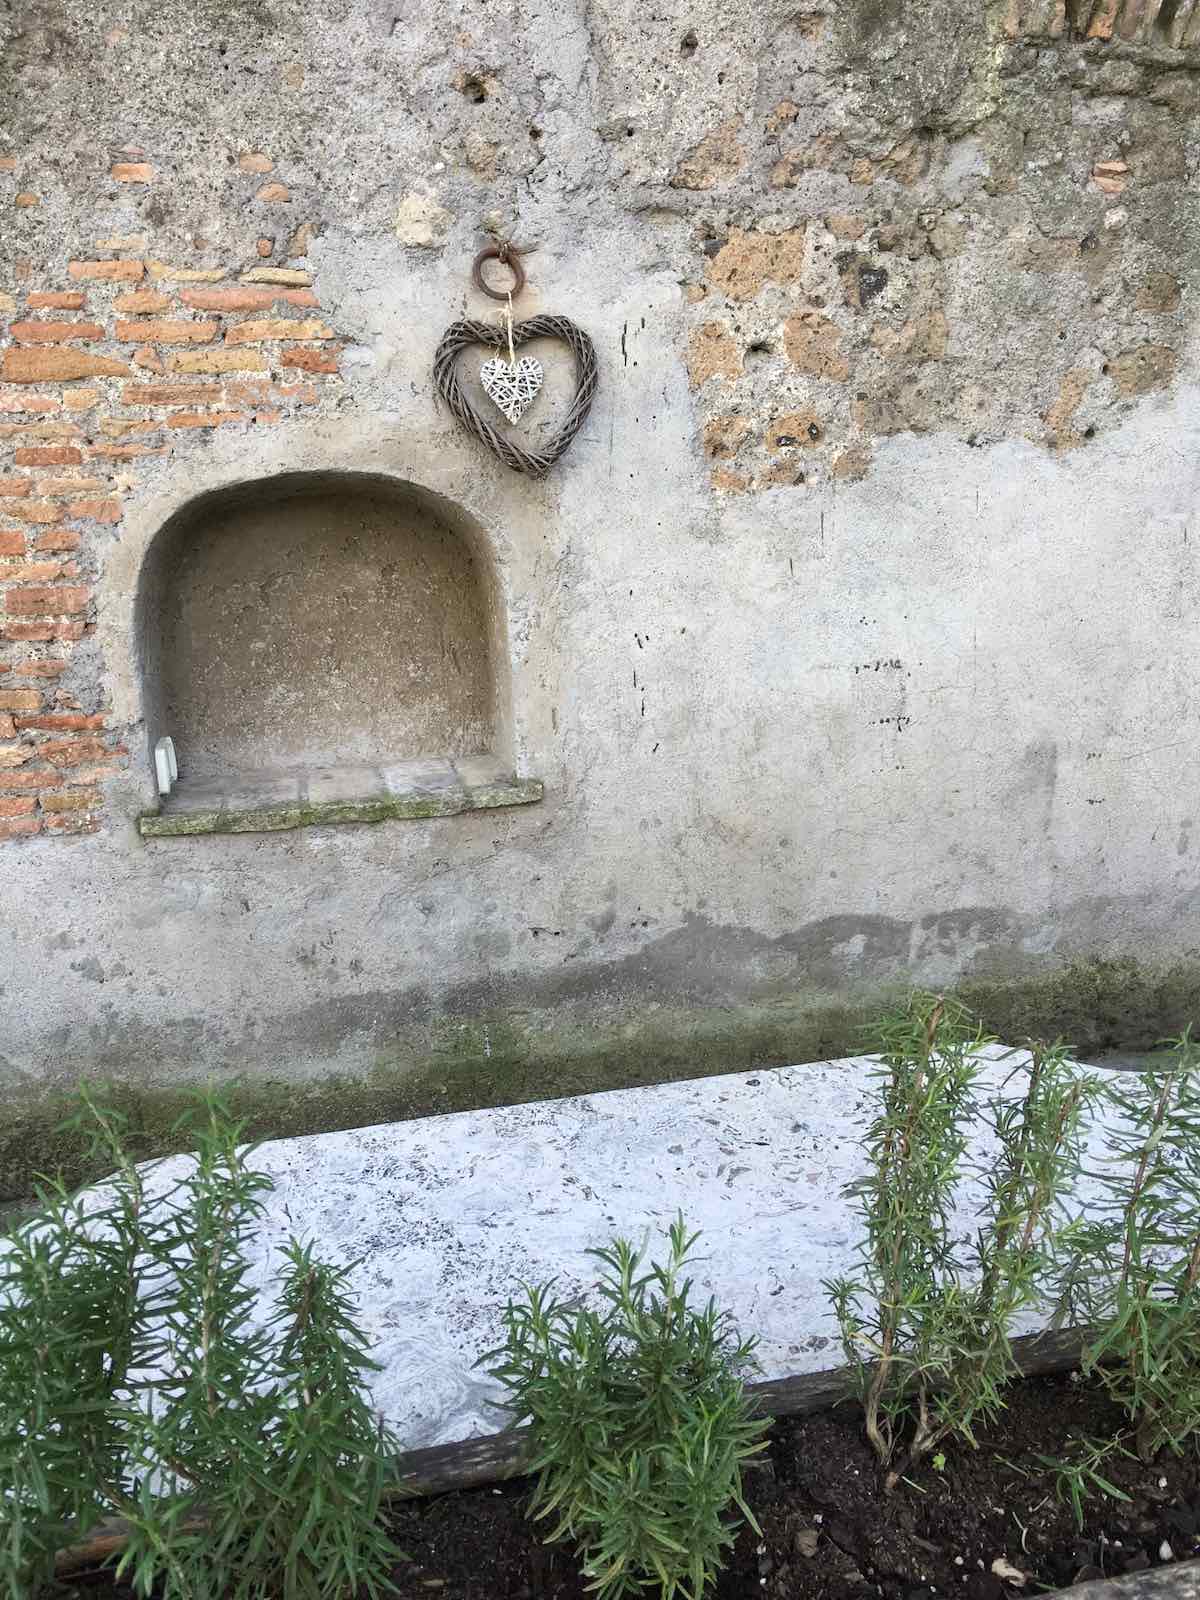 heart decorations on an old Italian building